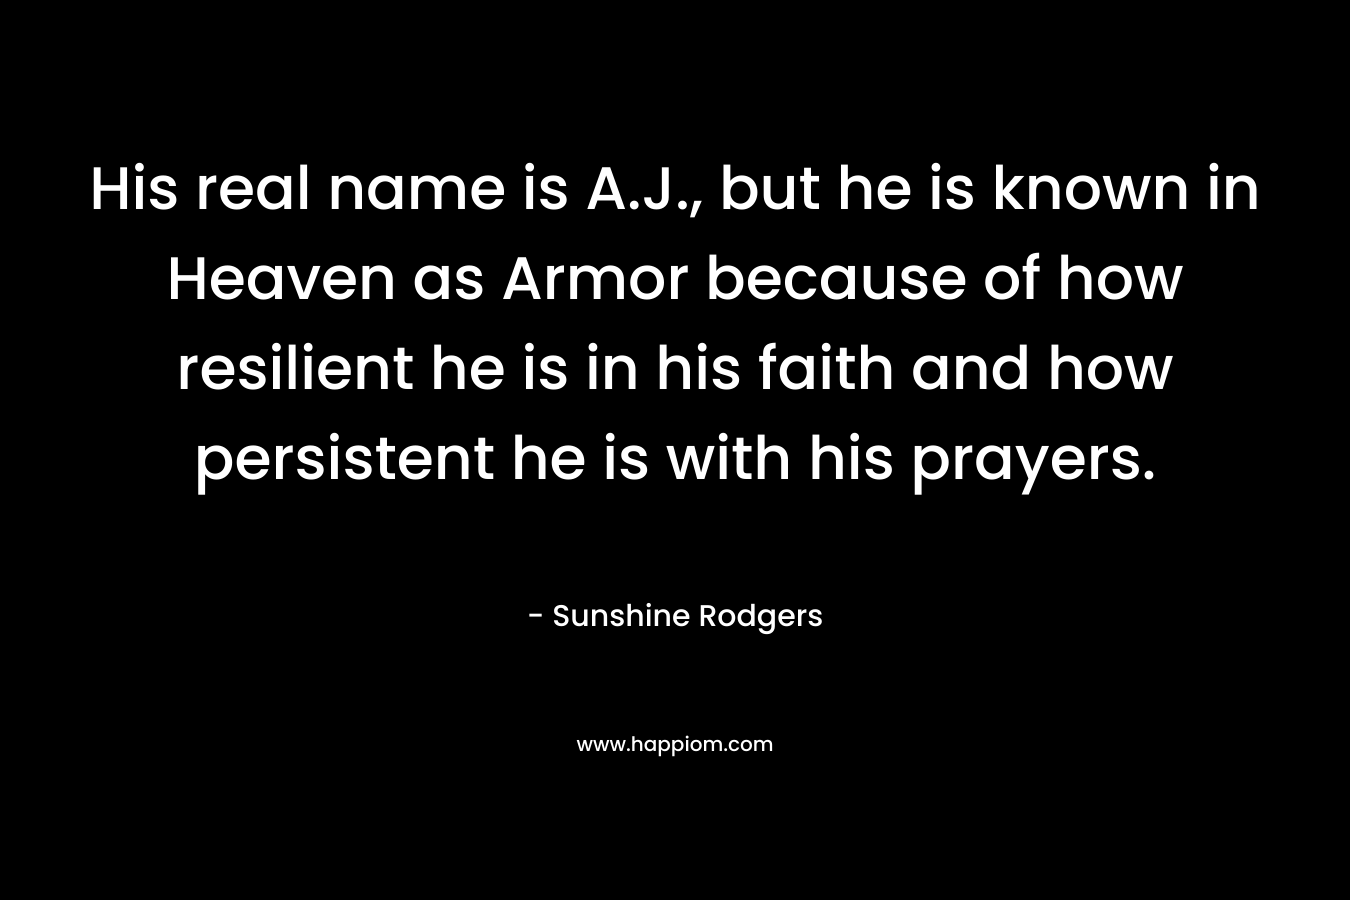 His real name is A.J., but he is known in Heaven as Armor because of how resilient he is in his faith and how persistent he is with his prayers.